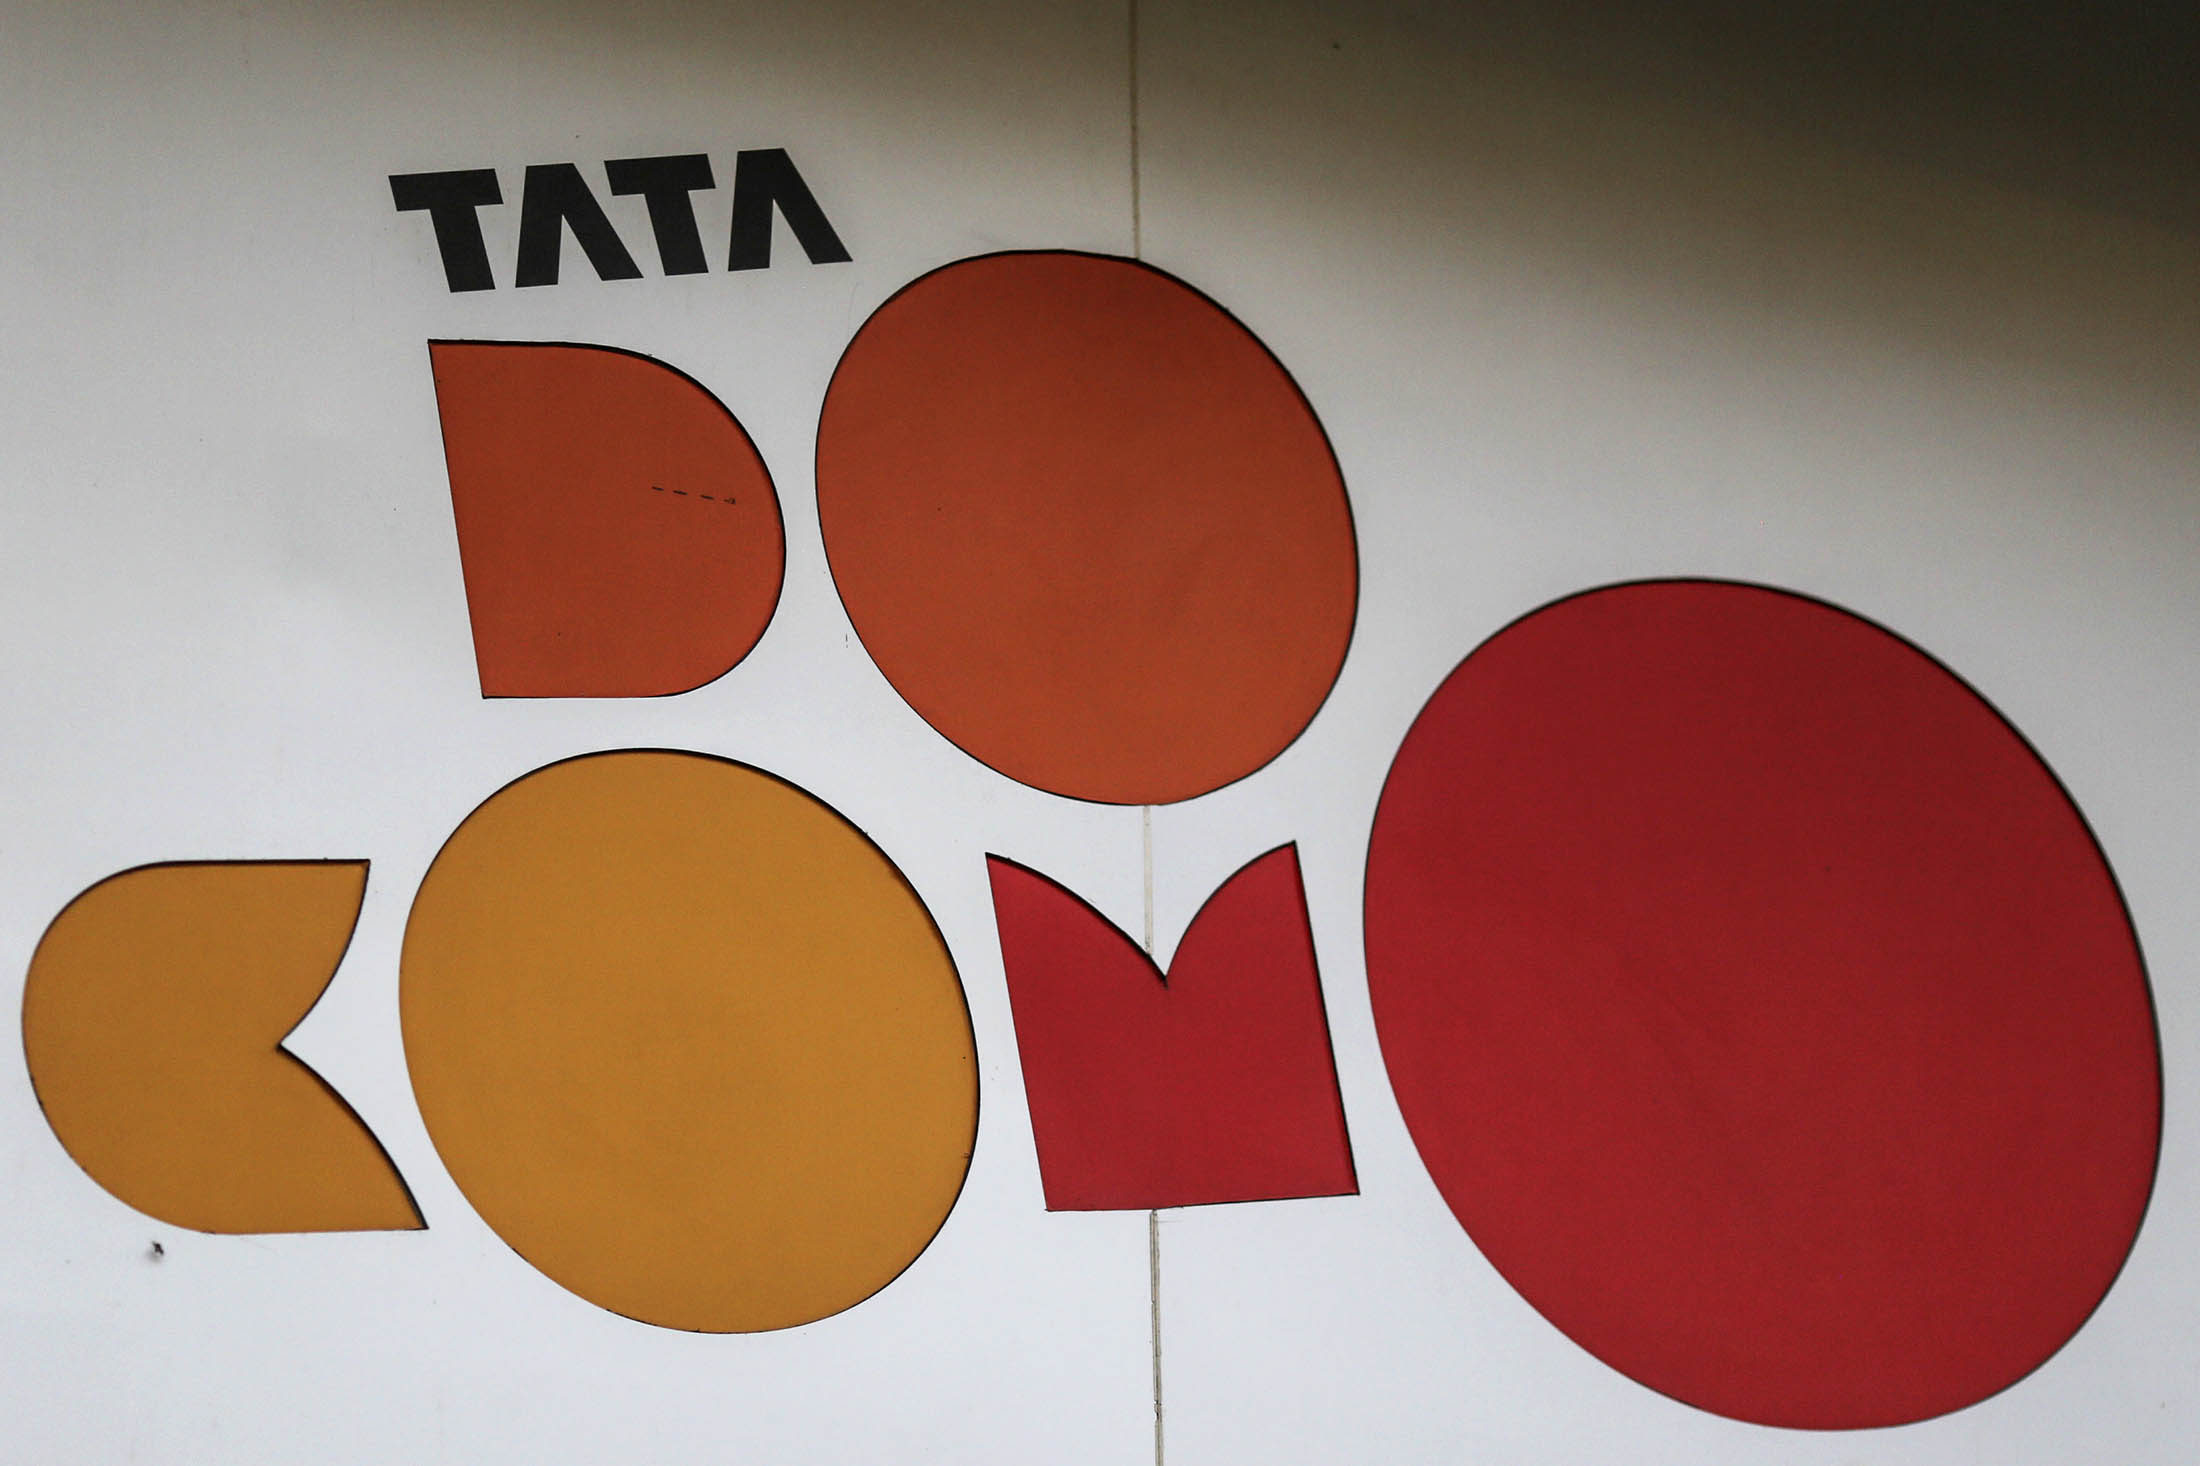 The logo of Tata DoCoMo, a joint venture between NTT DoCoMo Inc. and Tata Teleservices Ltd., is displayed outside a company's store in Mumbai, India, on Saturday, Nov. 5, 2016. Cyrus Mistry, the ousted chairman of India's biggest conglomerate, was replaced as Tata Sons chairman by his 78-year-old predecessor Ratan Tata at a board meeting on Oct. 24. Tata Sons said the conglomerate's board and Trustees of the Tata Trusts were concerned about a growing “trust deficit” with Mistry, which prompted the company to remove him.
